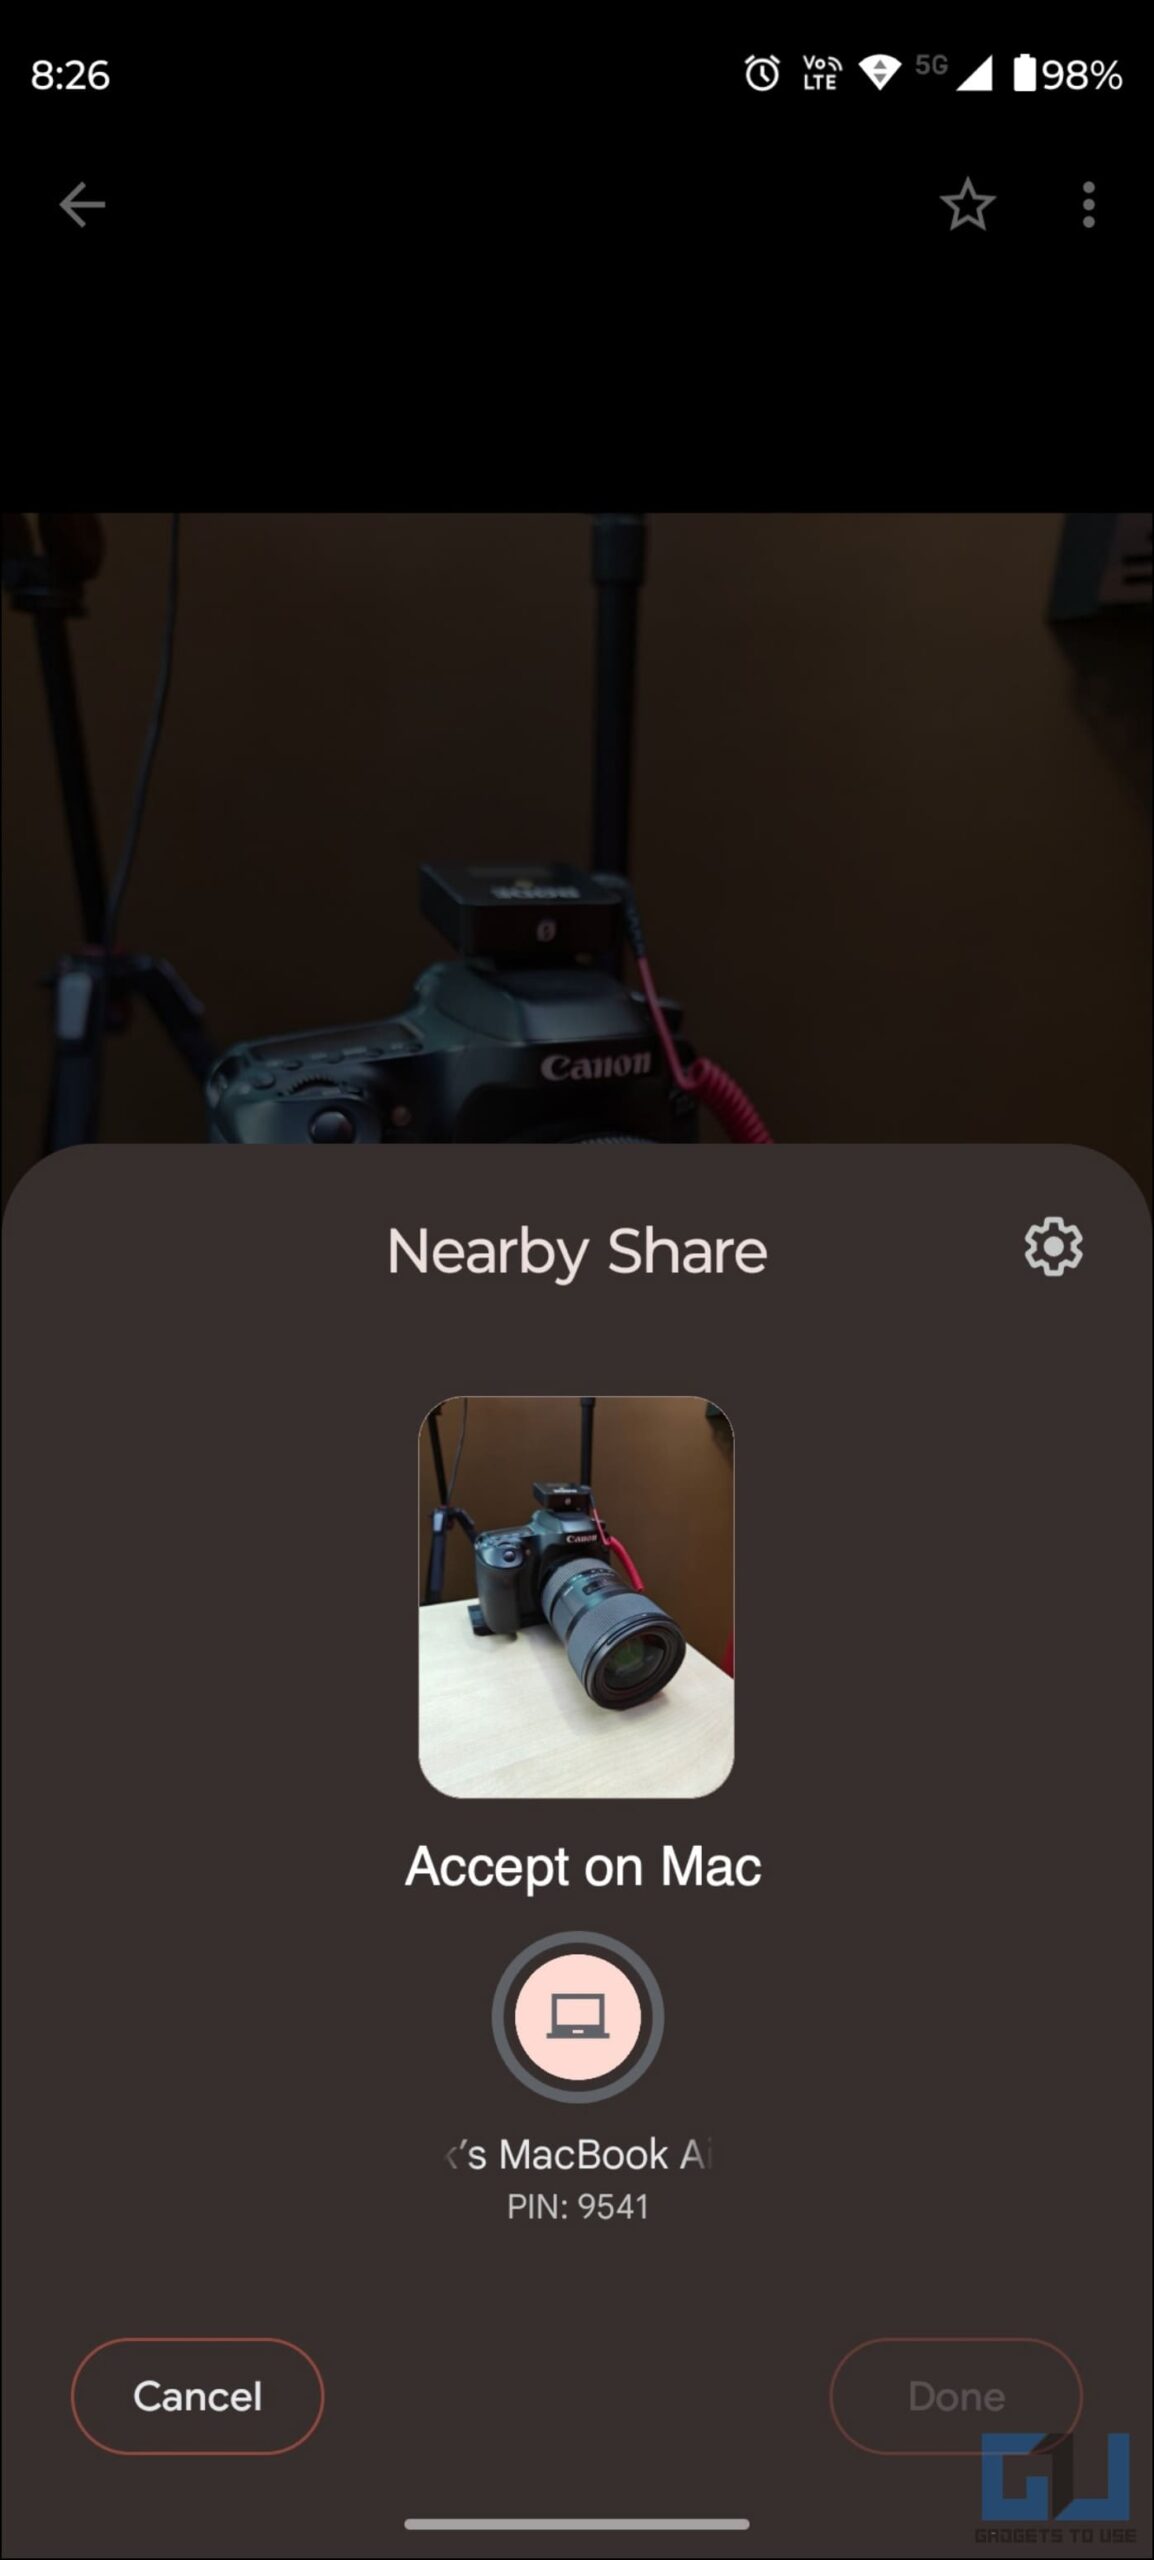 Share File from Android to Mac Using Nearby Share